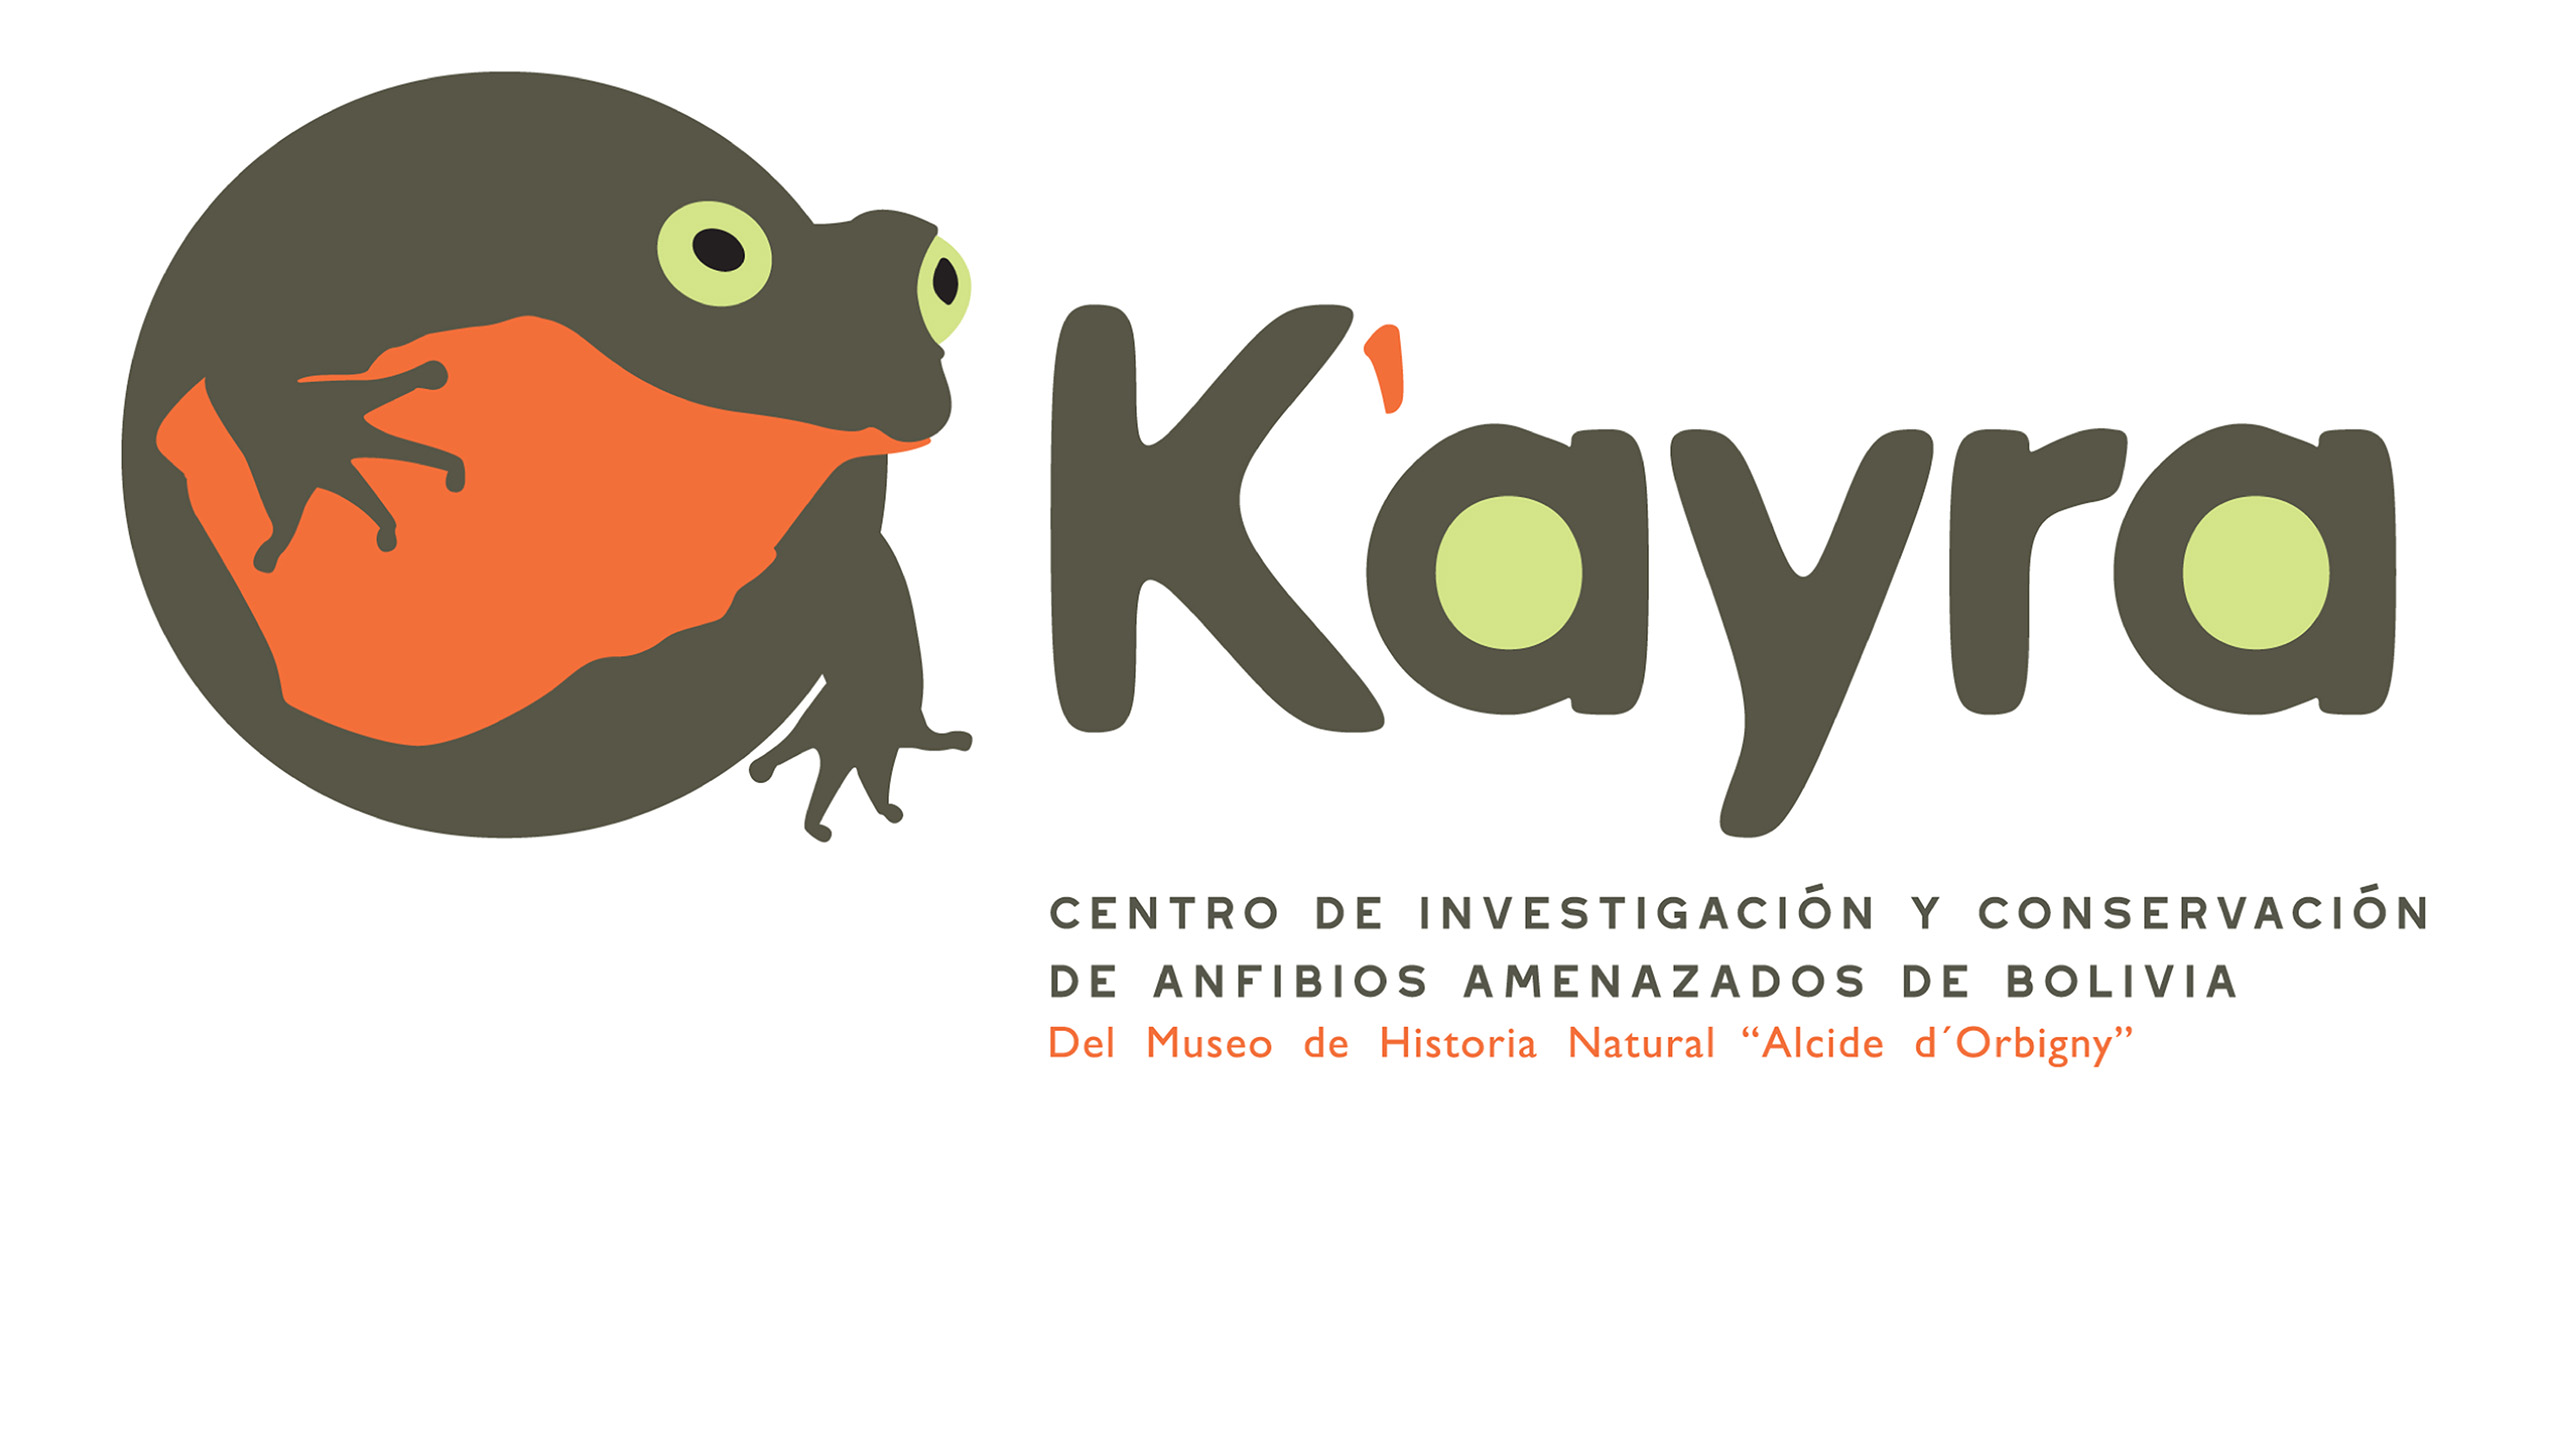 Through the Stiftung Artenschutz, the German zoos and especially the Aquazoo Löbbecke Museum in Düsseldorf supported the local partners: Logo of the project partner K'ayra Center as well as ...